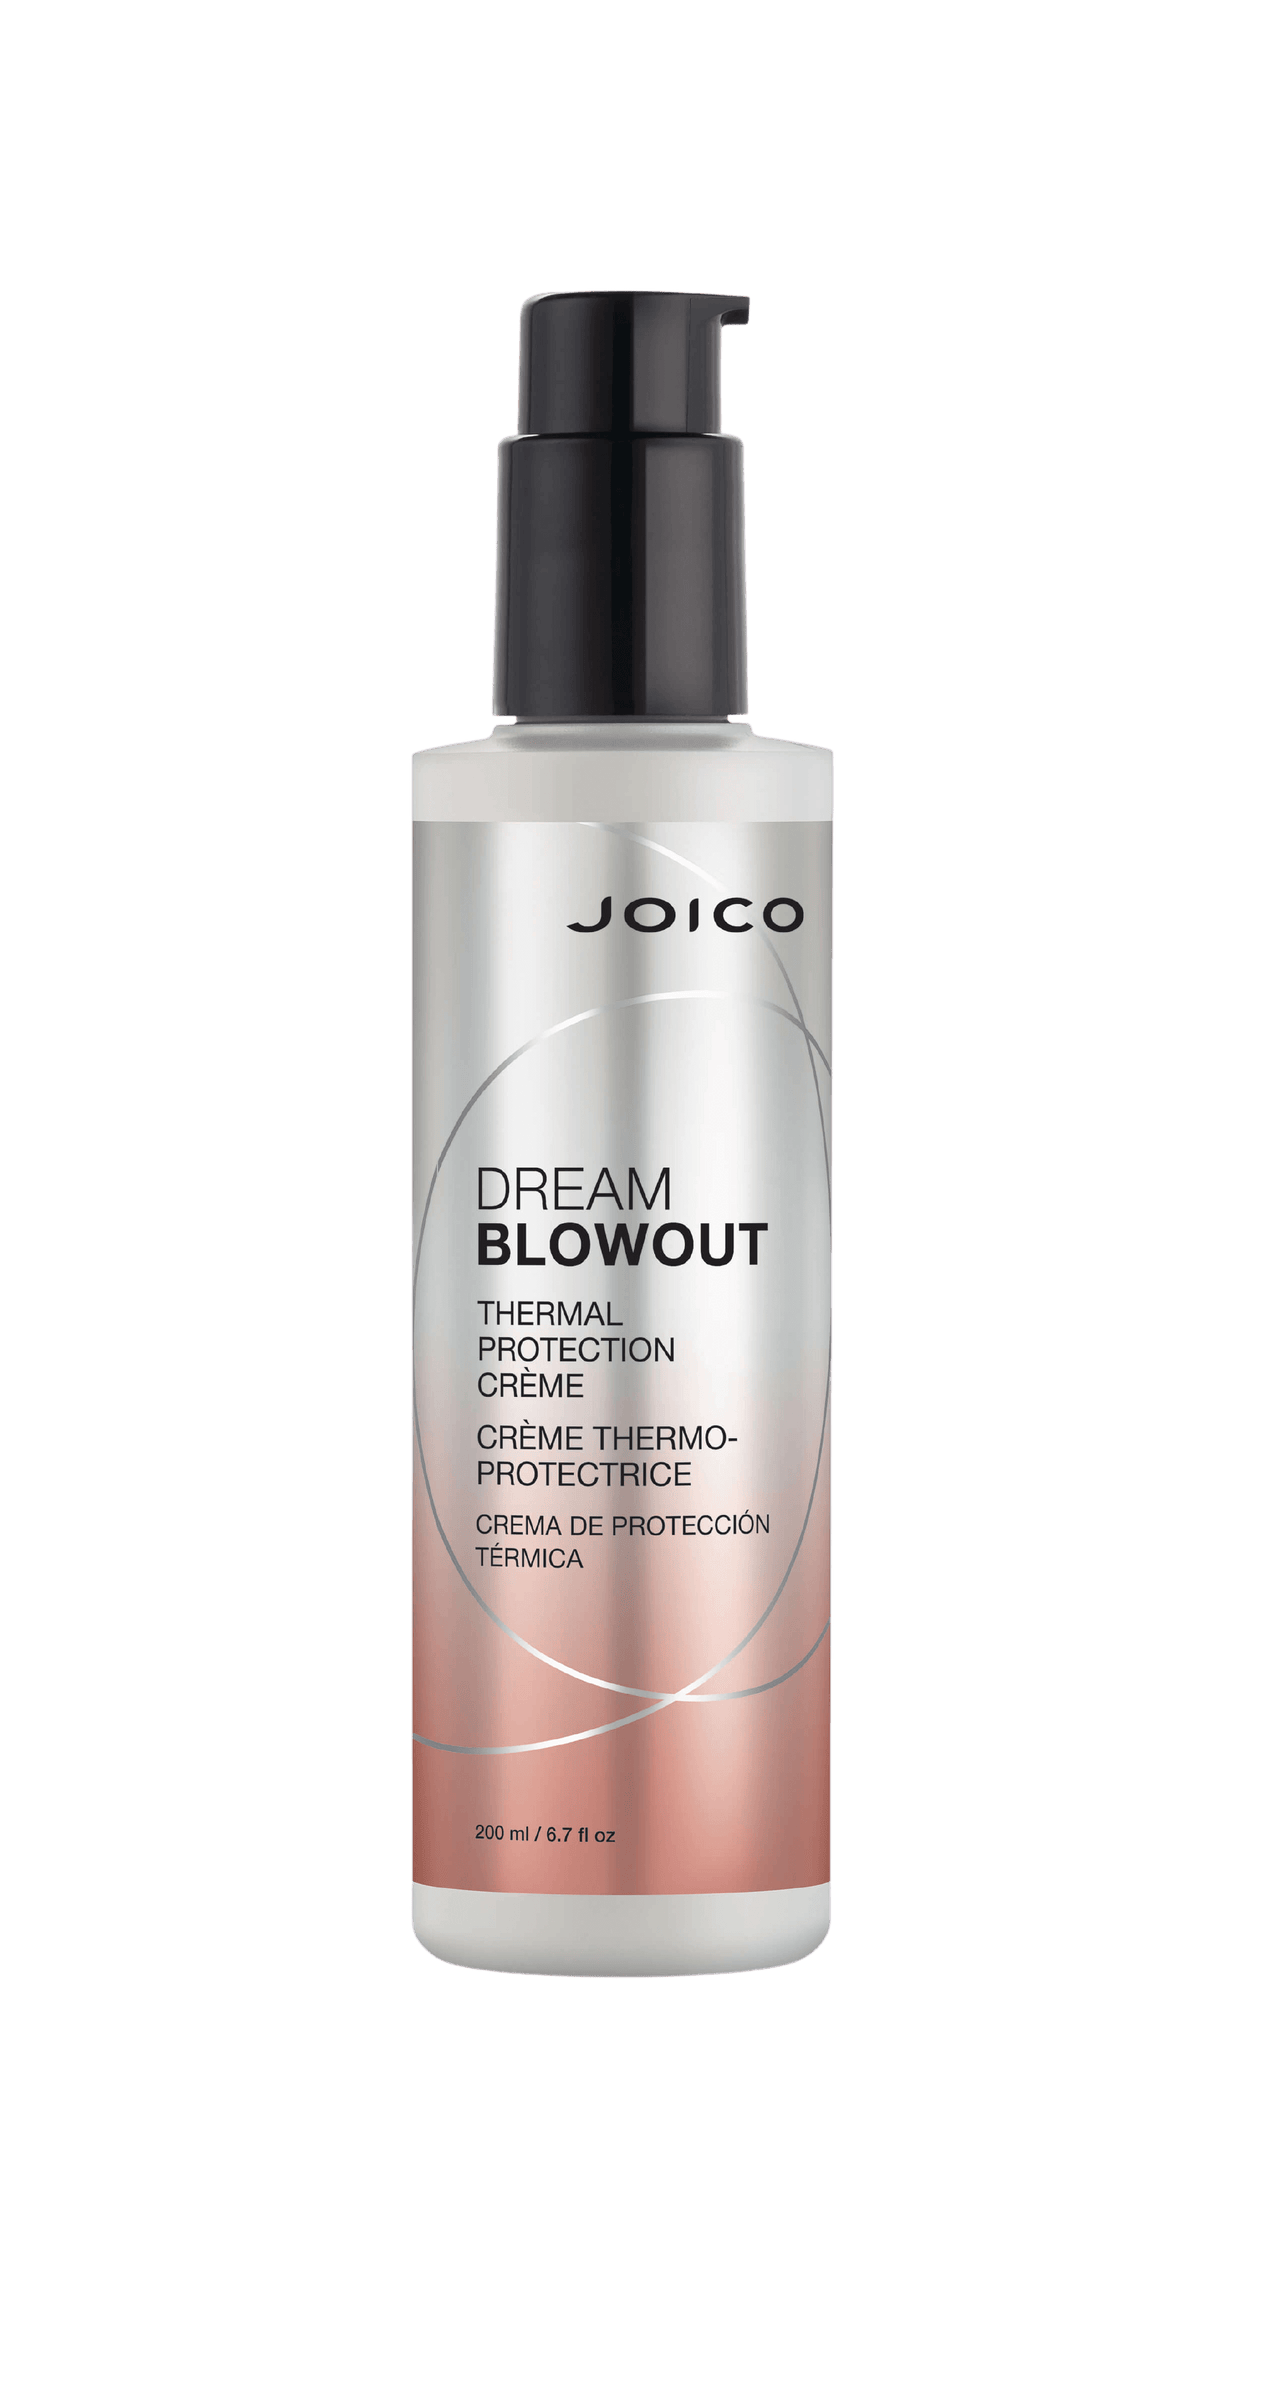 Joico Dream Blowout Thermal Protection Creme 200mL Pump Bottle